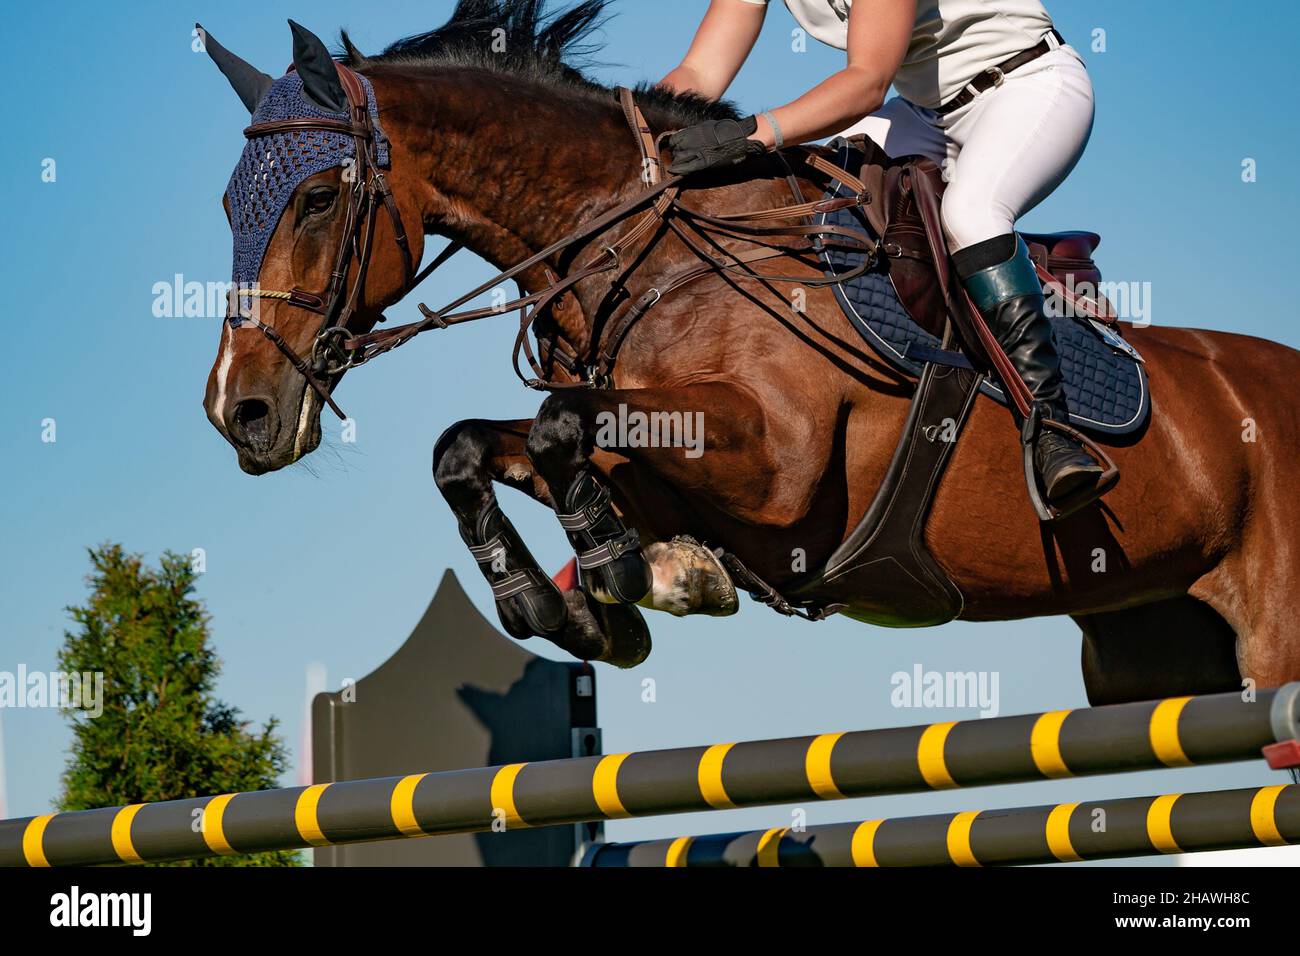 Horse Jumping, Equestrian Sports, Show Jumping event themed photograph Stock Photo